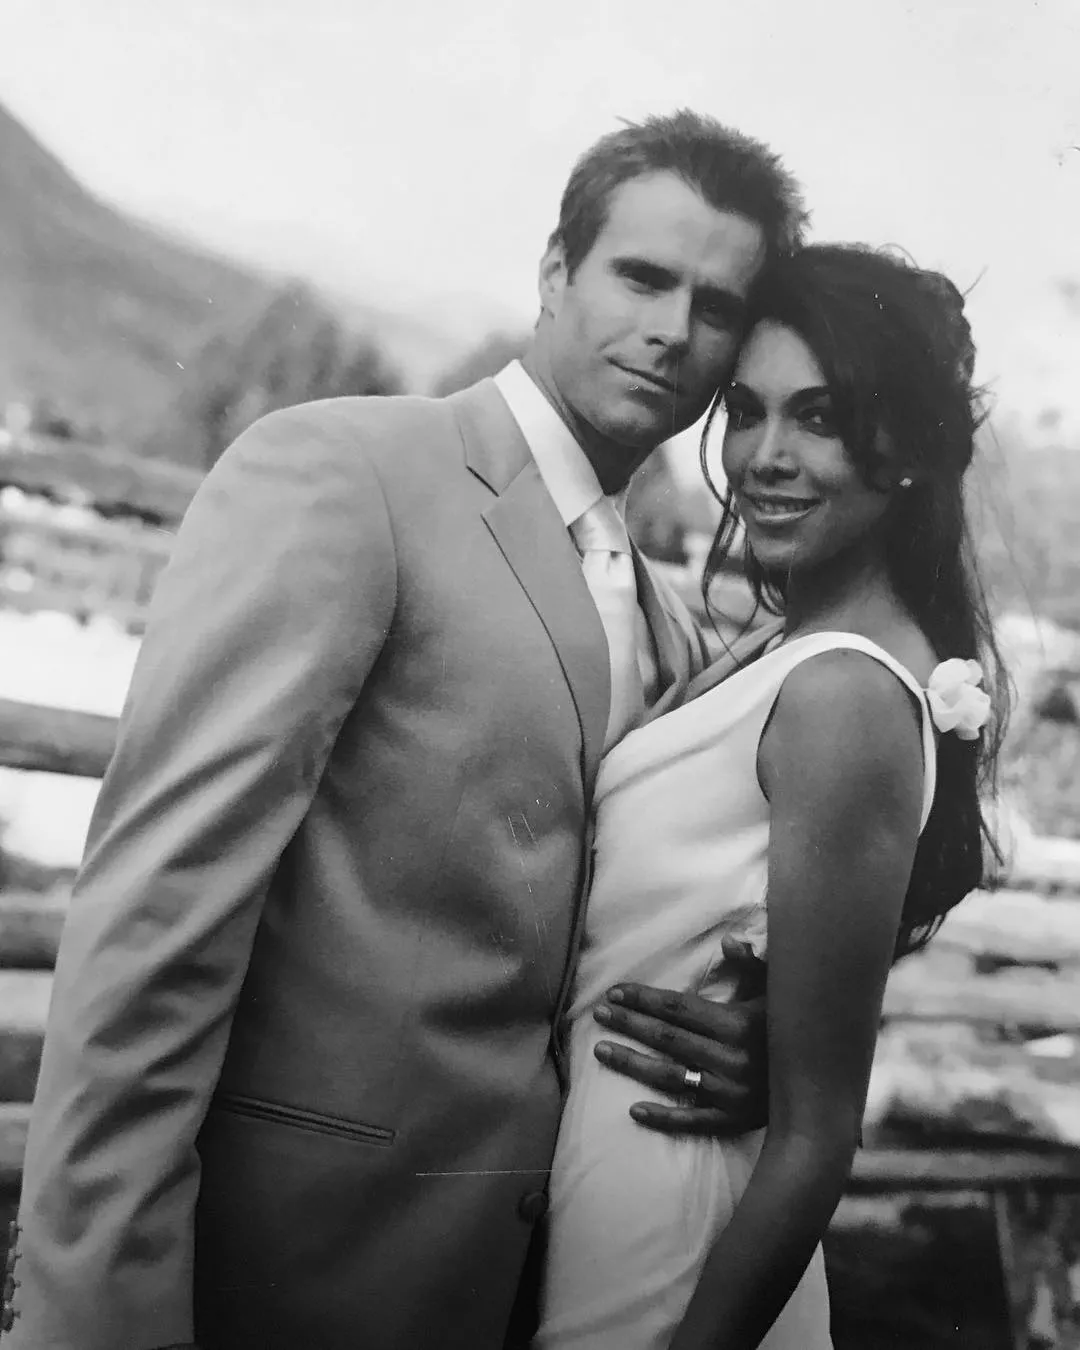 Cameron Mathison and his wife, Vanessa Arevalo, on their wedding day